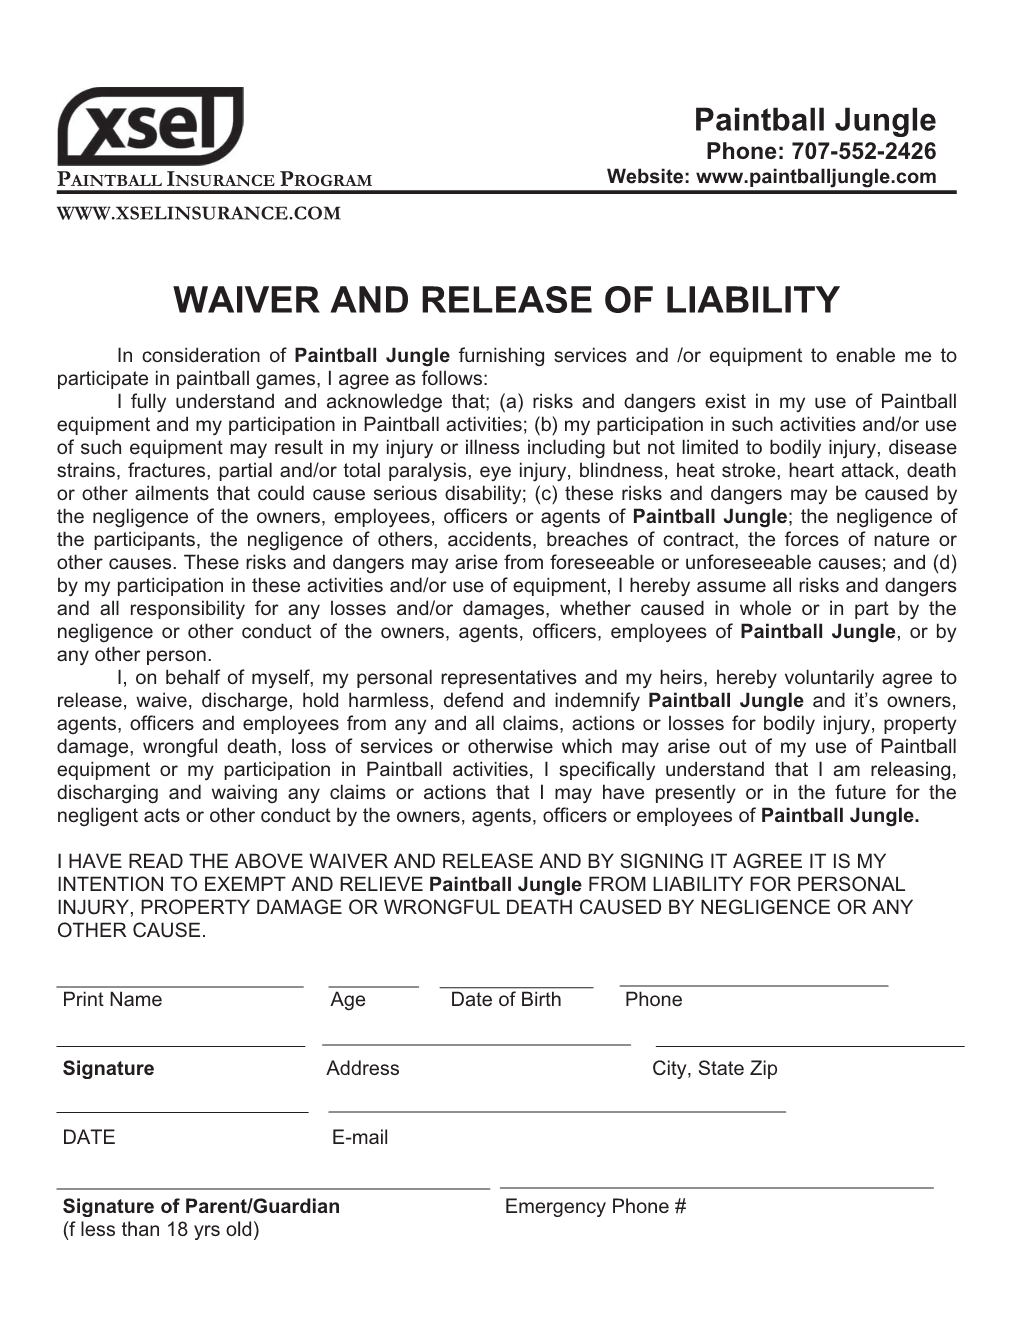 Waiver and Release of Liability